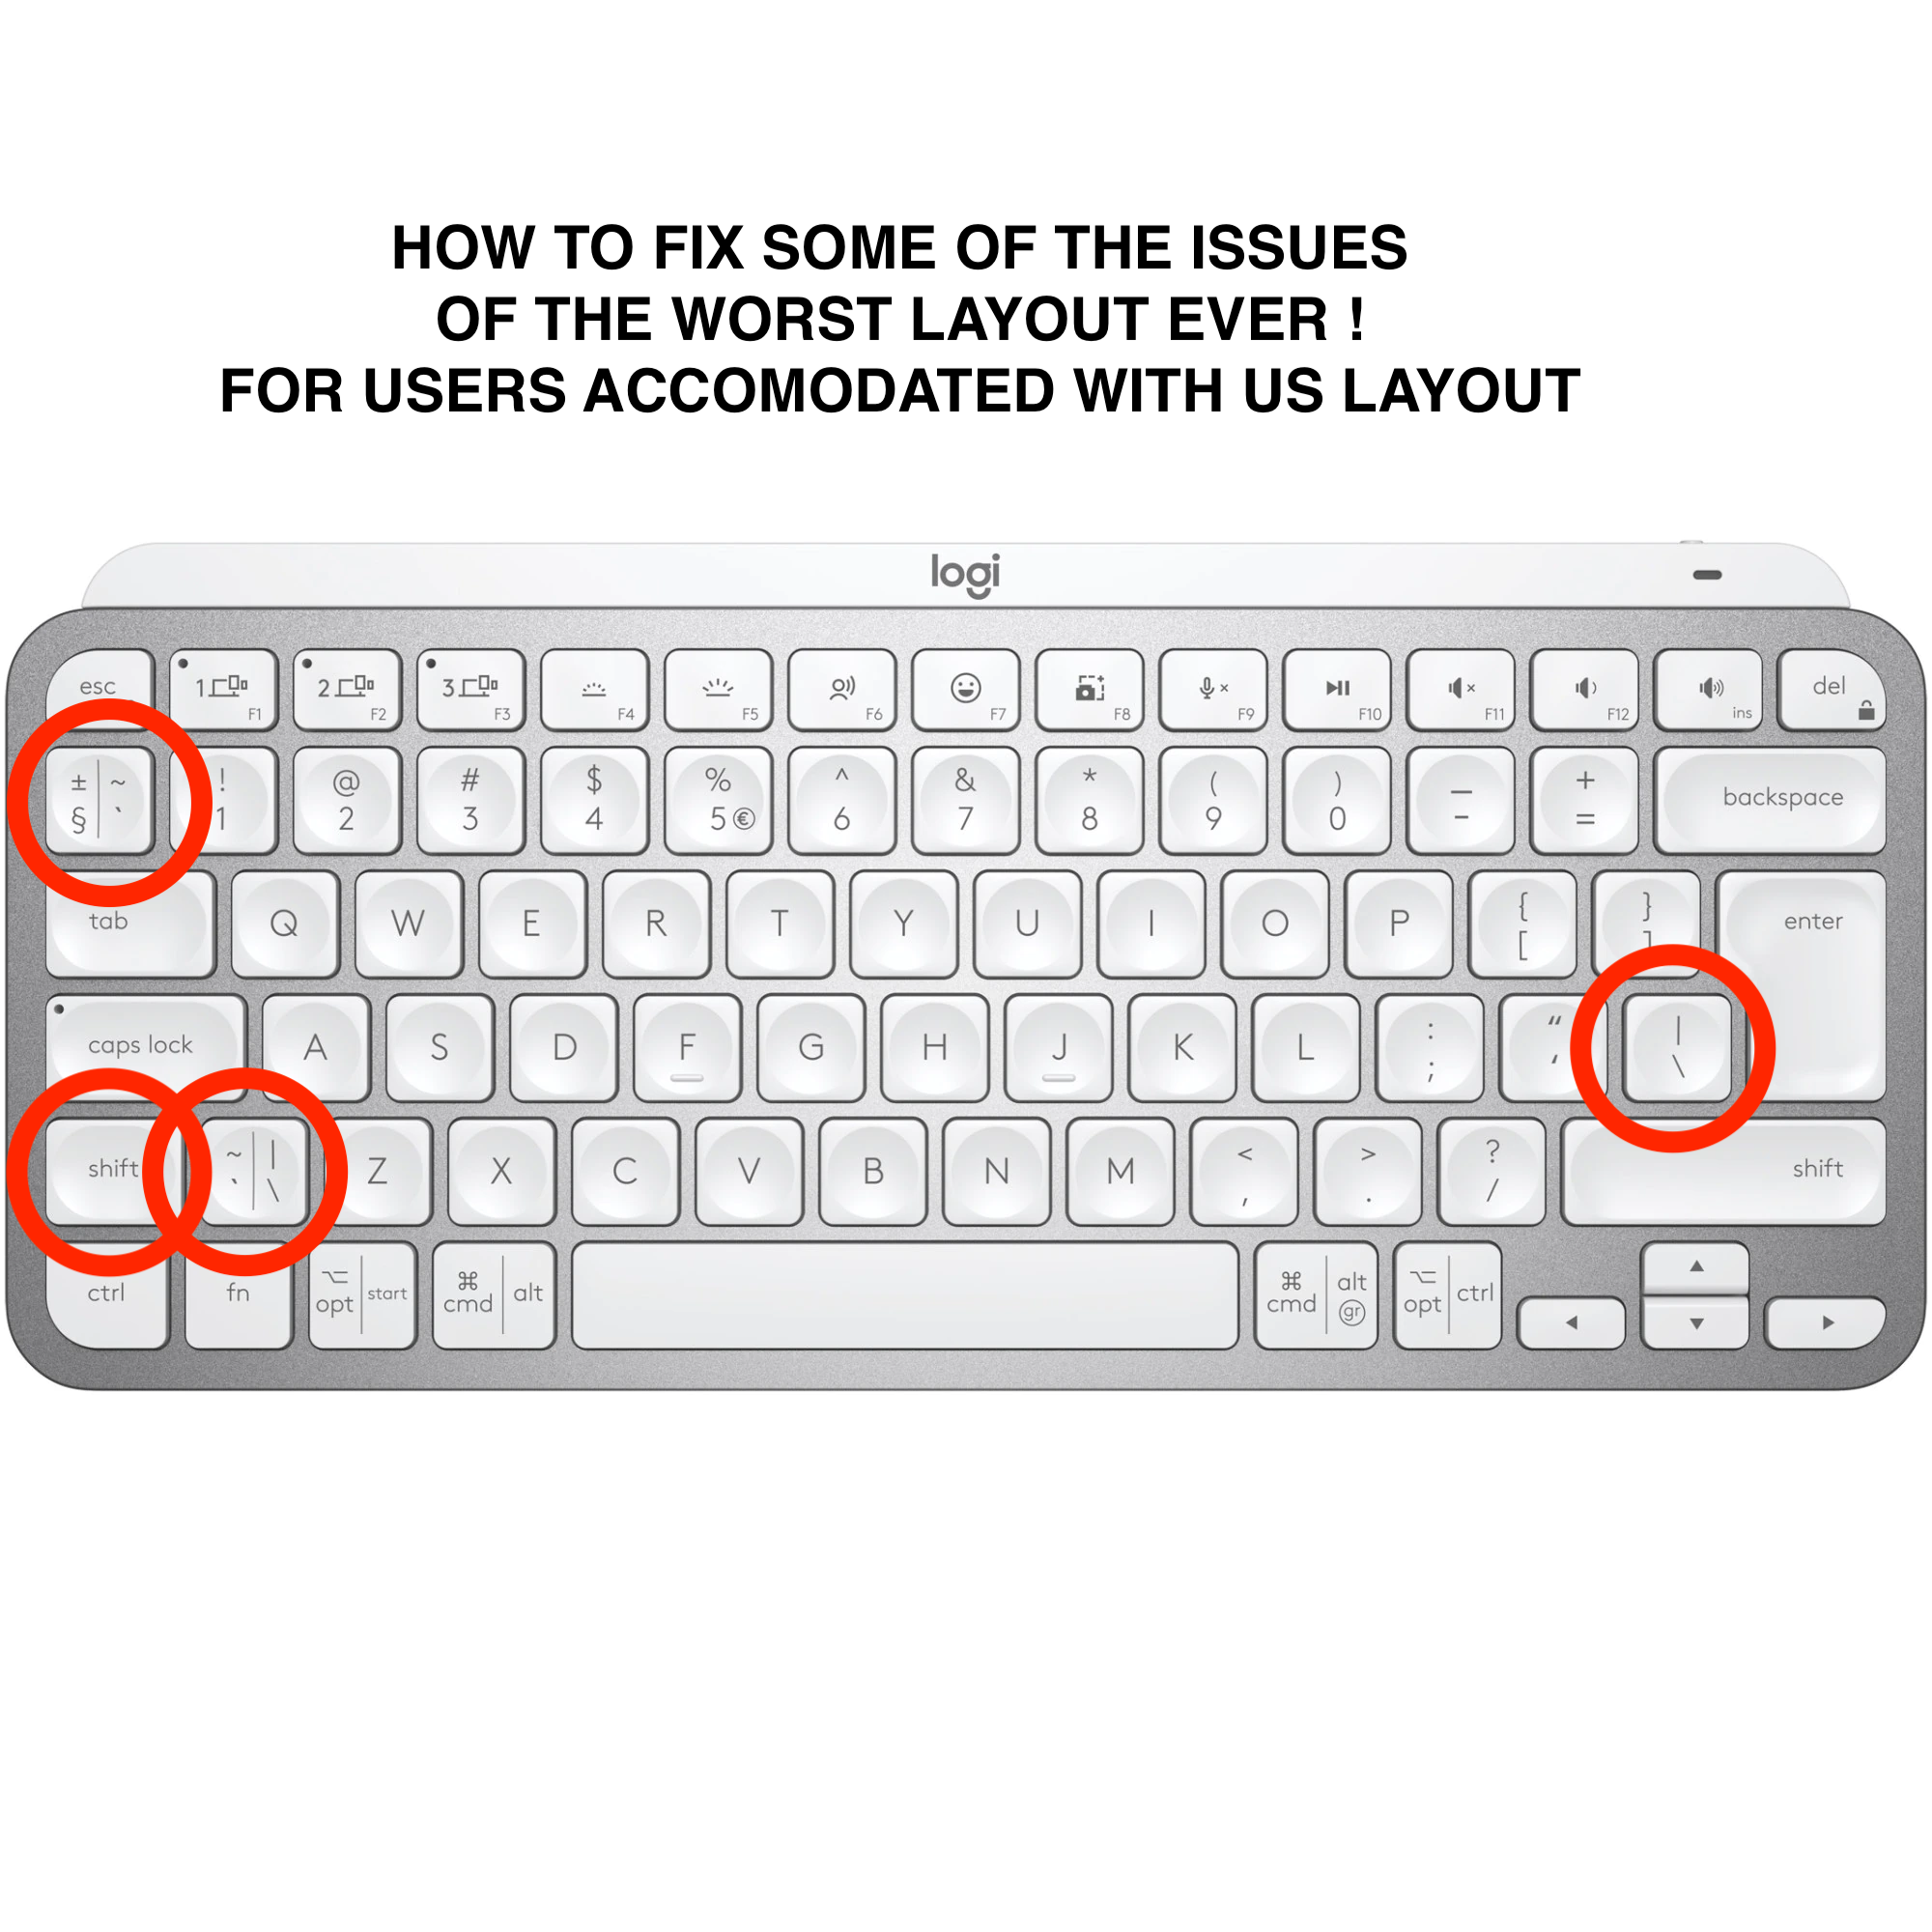 lag twinkle renhed Logitech MX keyboard apostrophe layout issue solution – Mihai MATEI